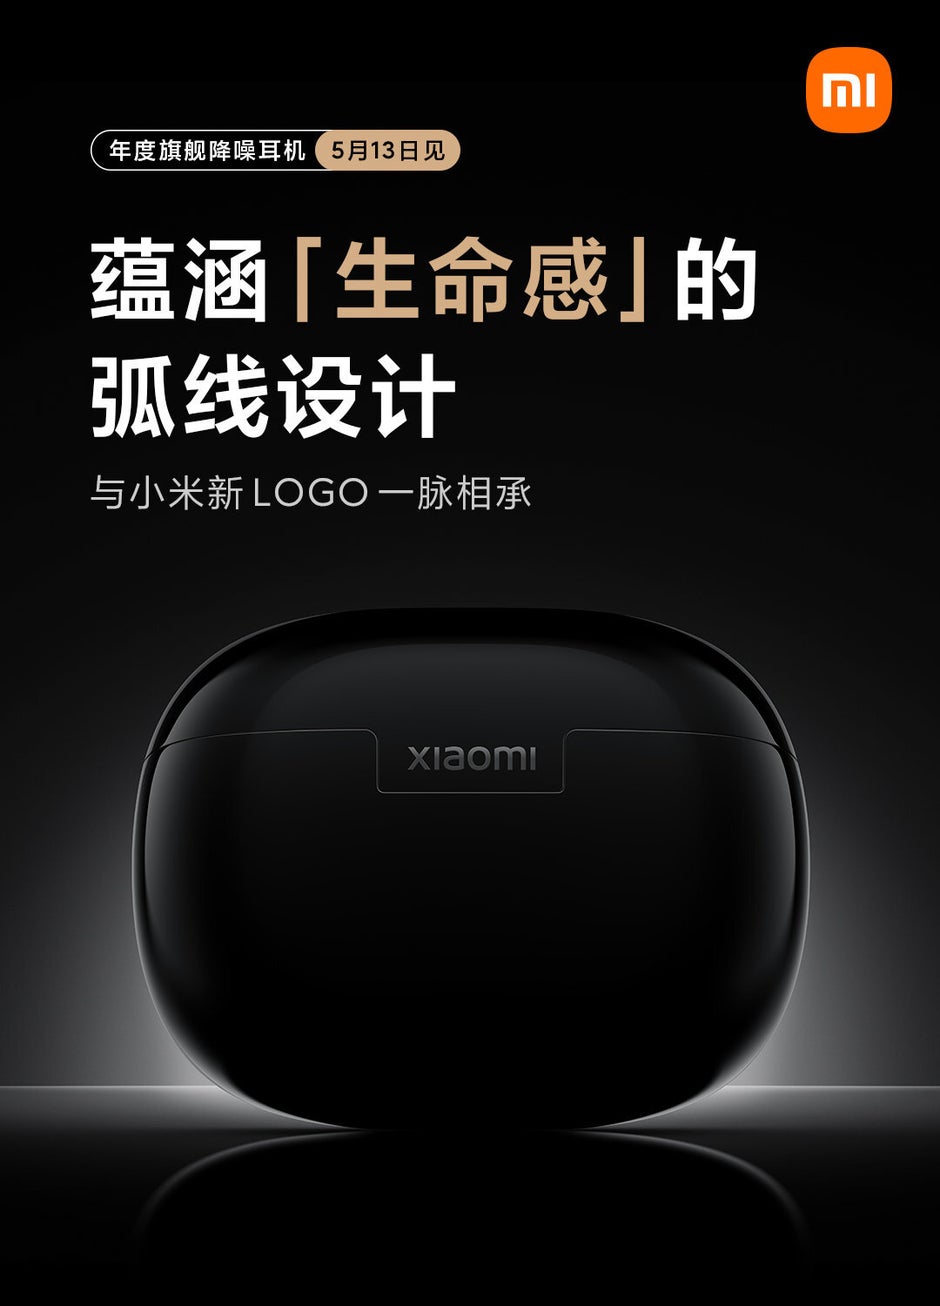 Xiaomi to release new Noise Cancelling earbuds on May 13